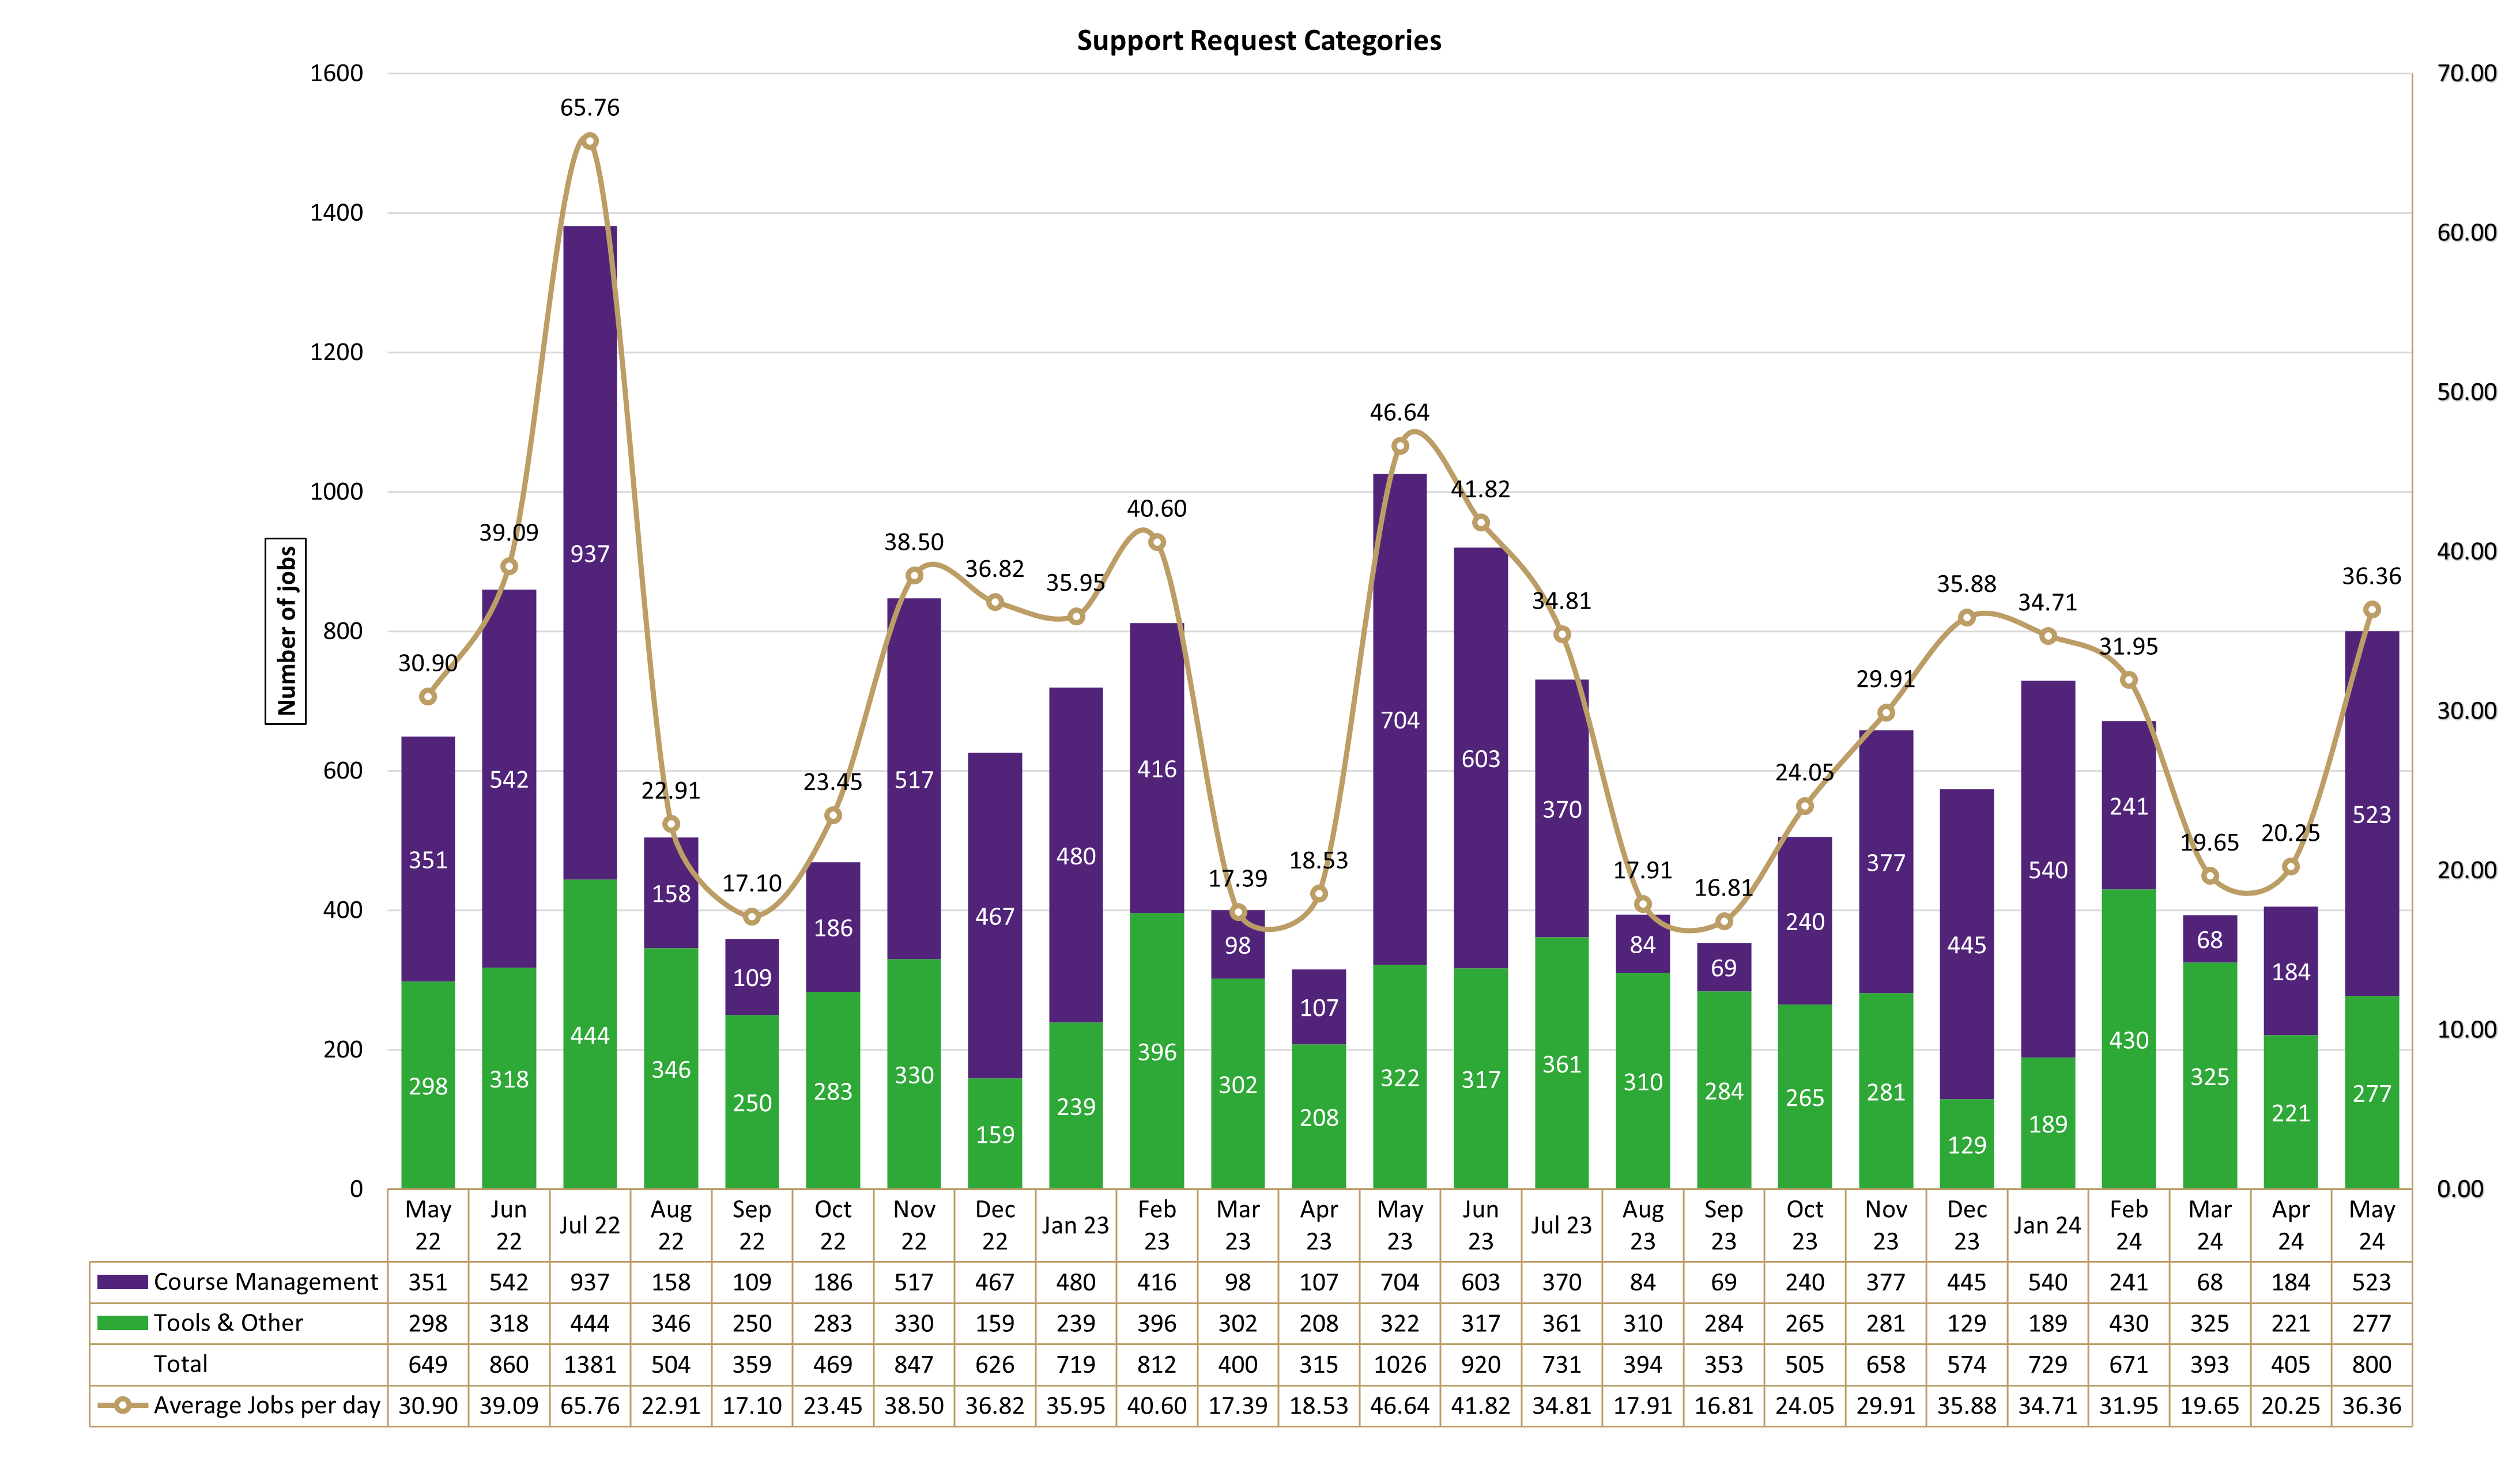 Chart of Support Request Categories from May 2022 to May 2024